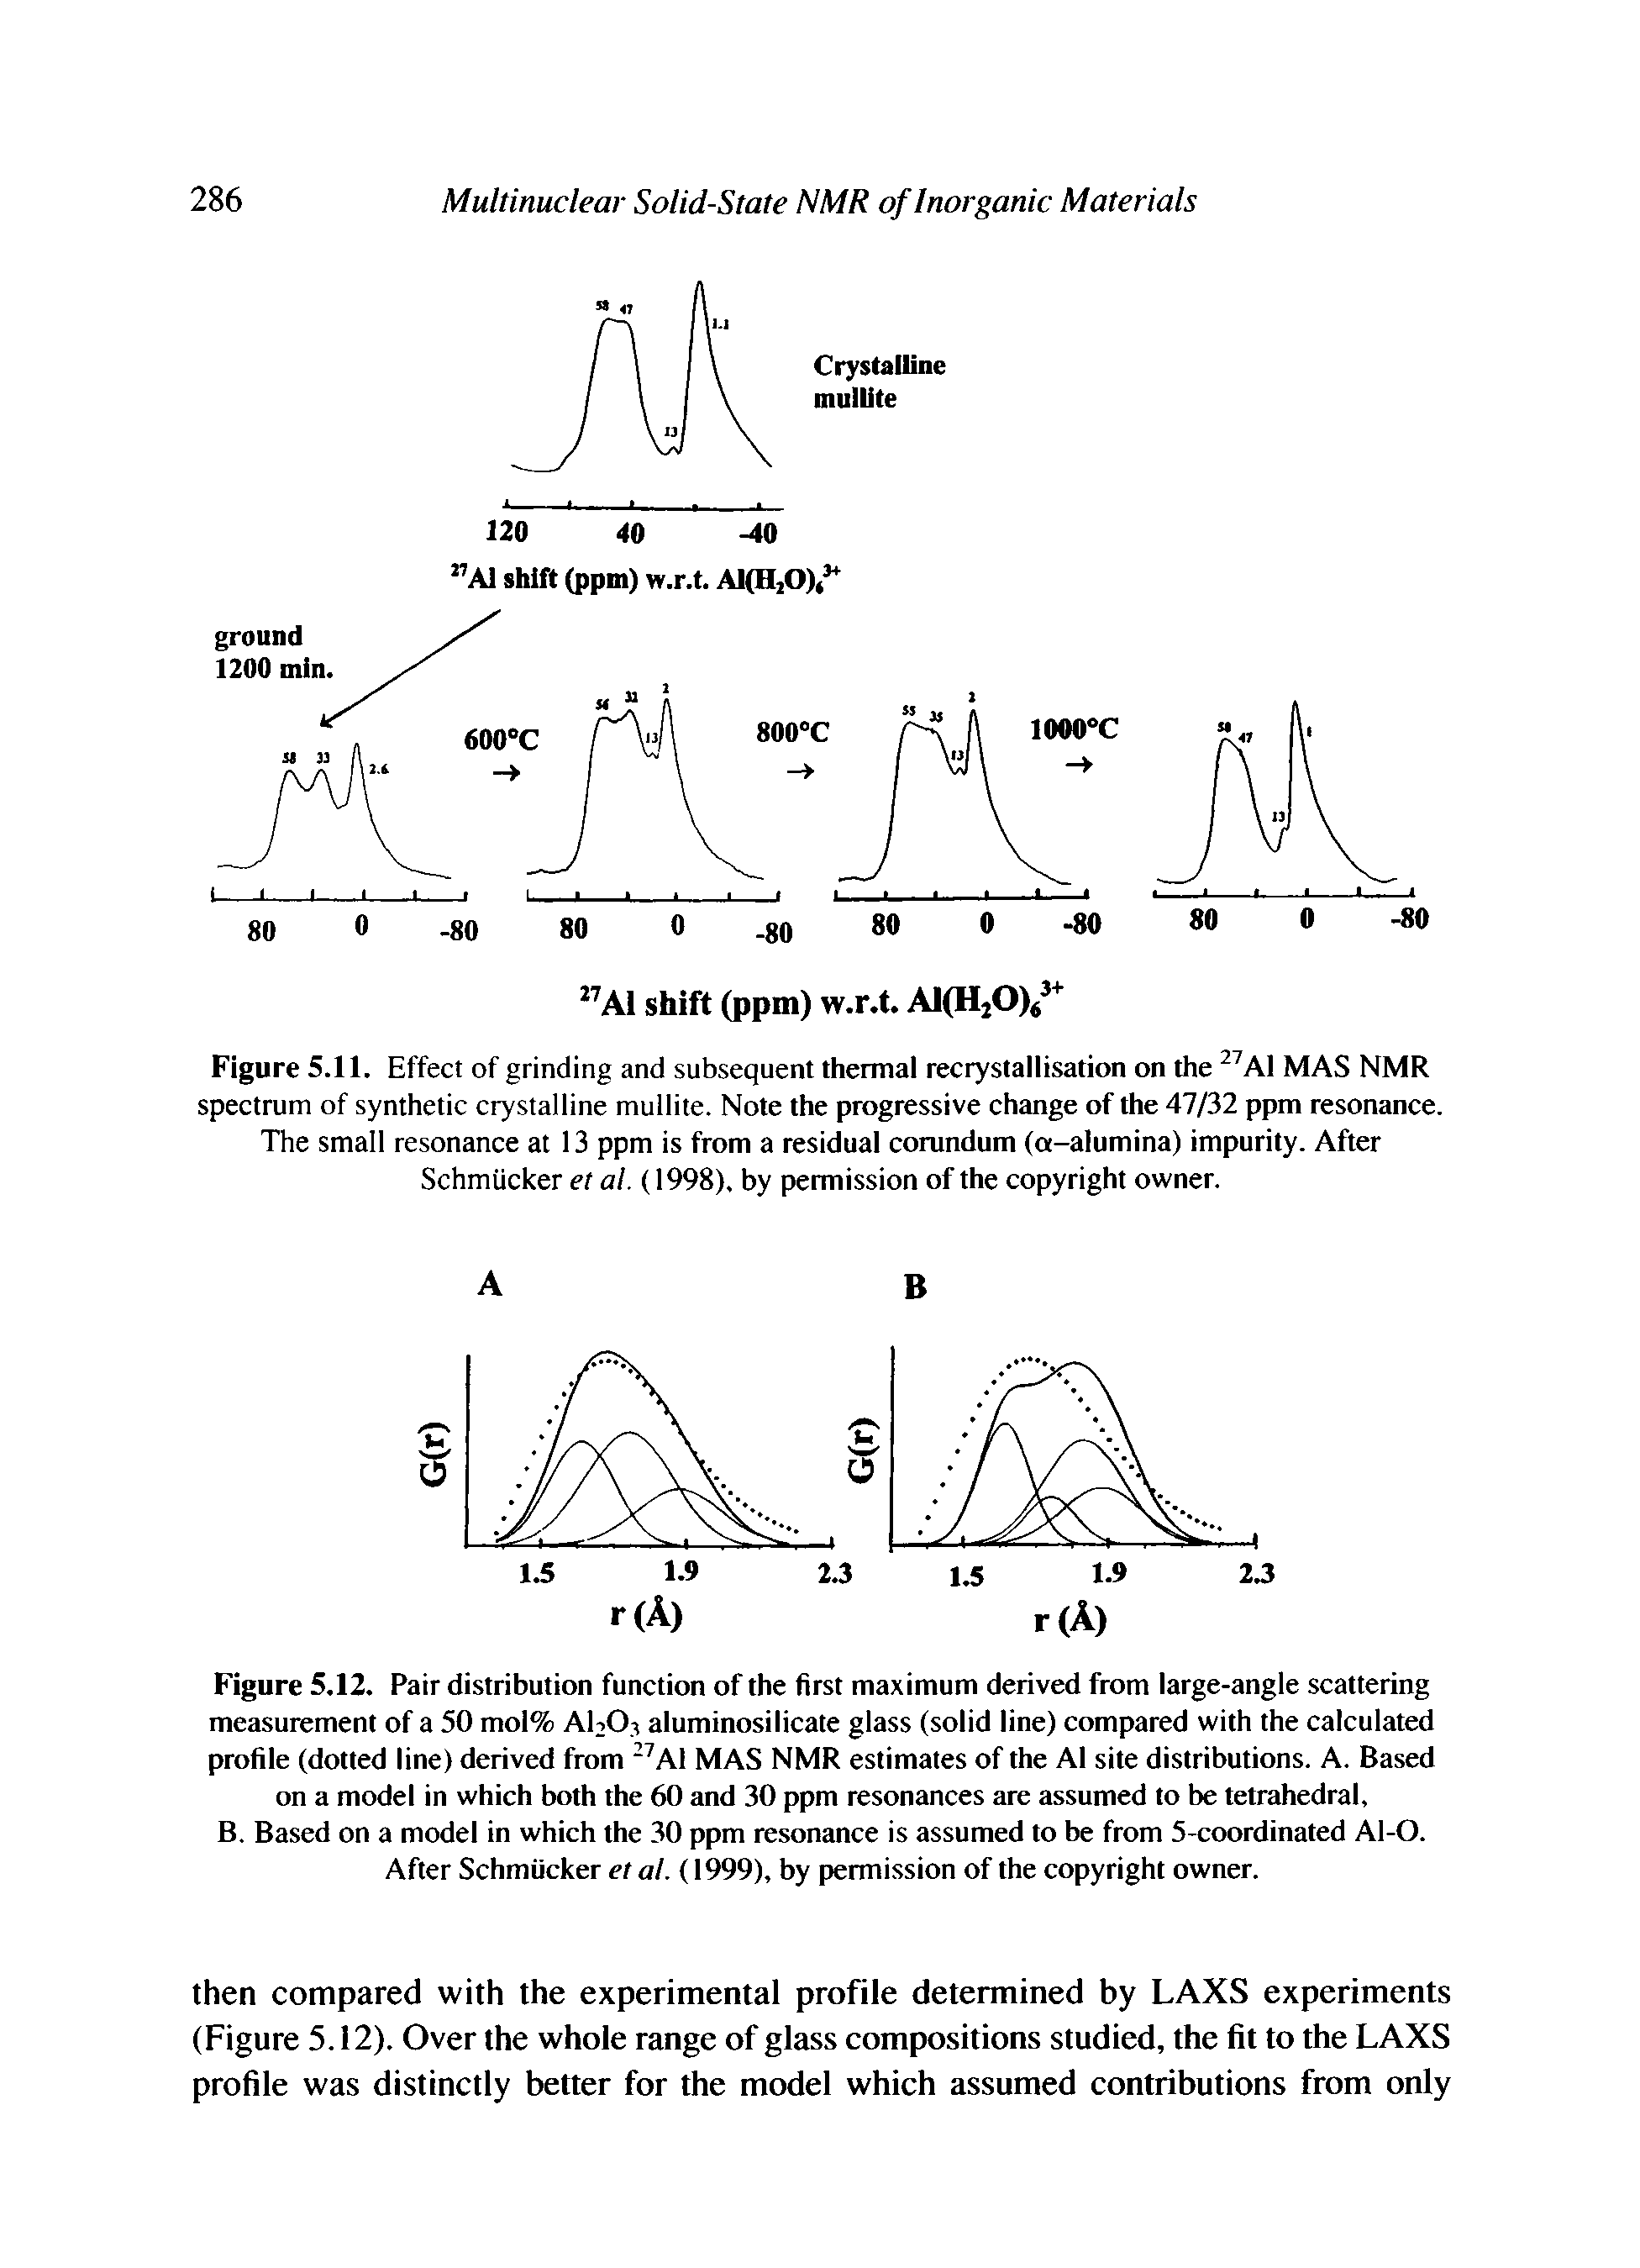 Figure 5.12. Pair distribution function of the first maximum derived from large-angle scattering measurement of a 50 mol% AEOj aluminosilicate glass (solid line) compared with the calculated profile (dotted line) derived from Al MAS NMR estimates of the Al site distributions. A. Based on a model in which both the 60 and 30 ppm resonances are assumed to be tetrahedral,...